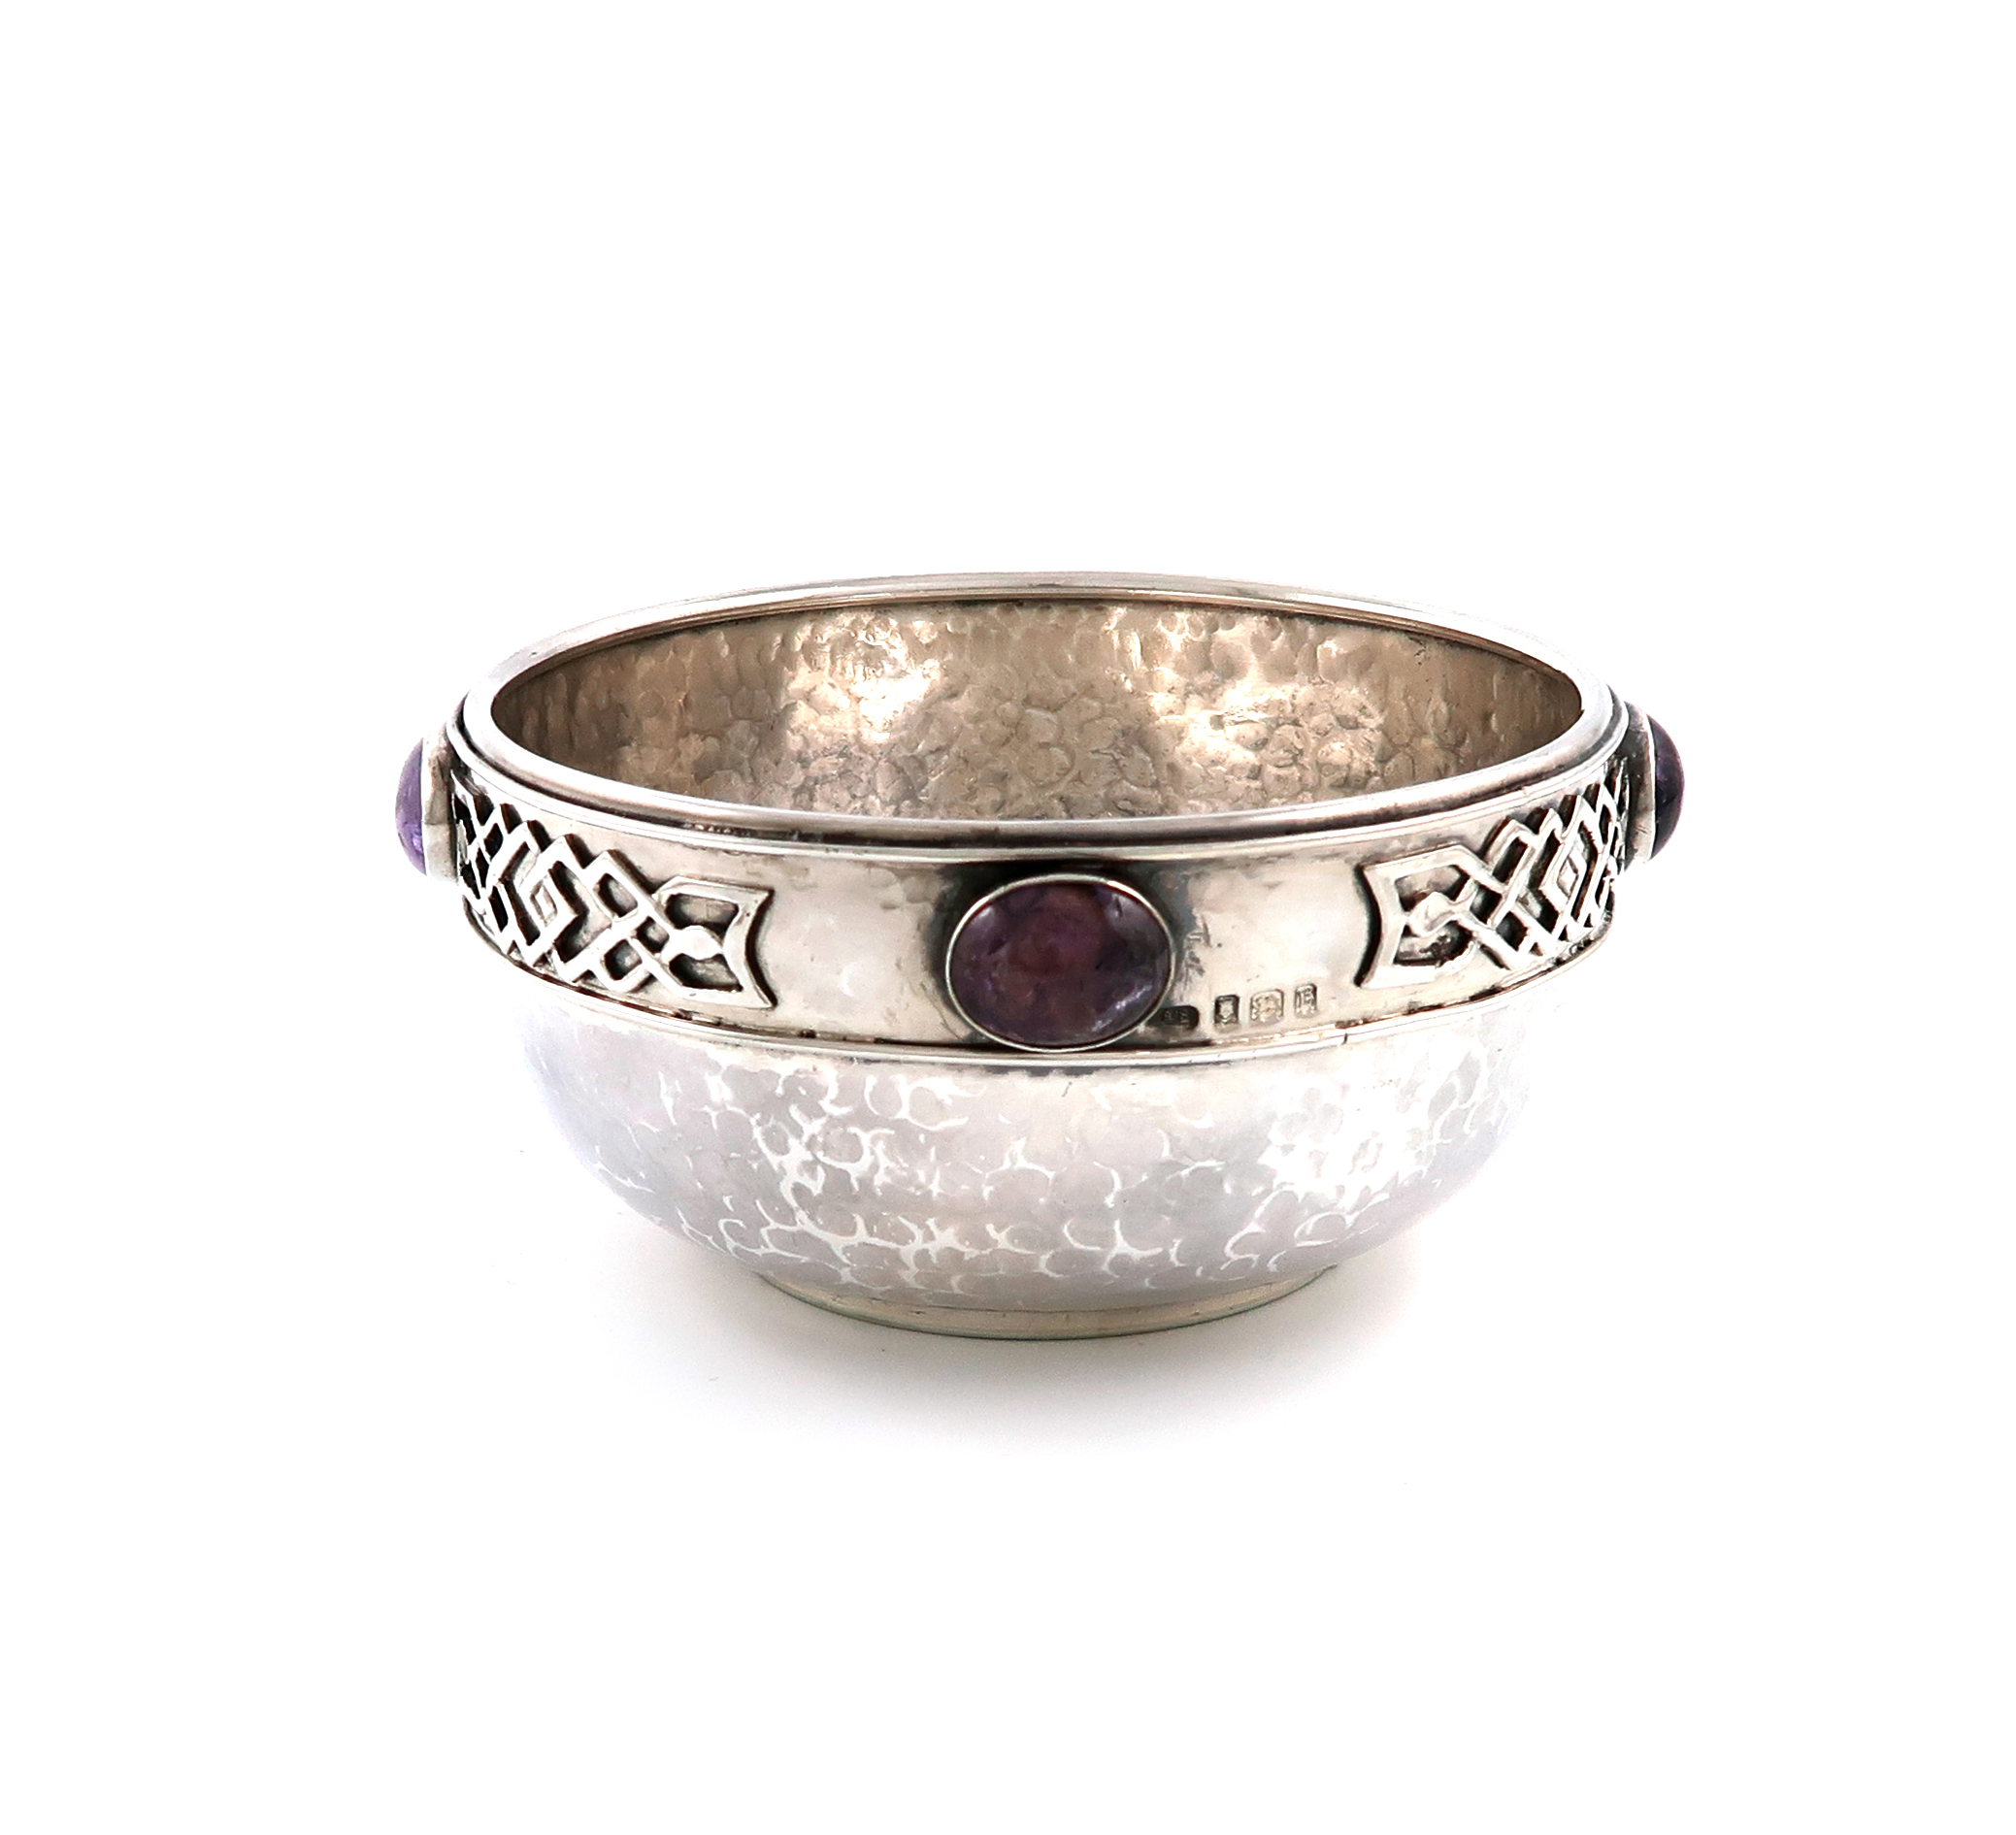 By The Sandheim Brothers, an Arts and Crafts silver bowl, London 1918, circular form, spot-